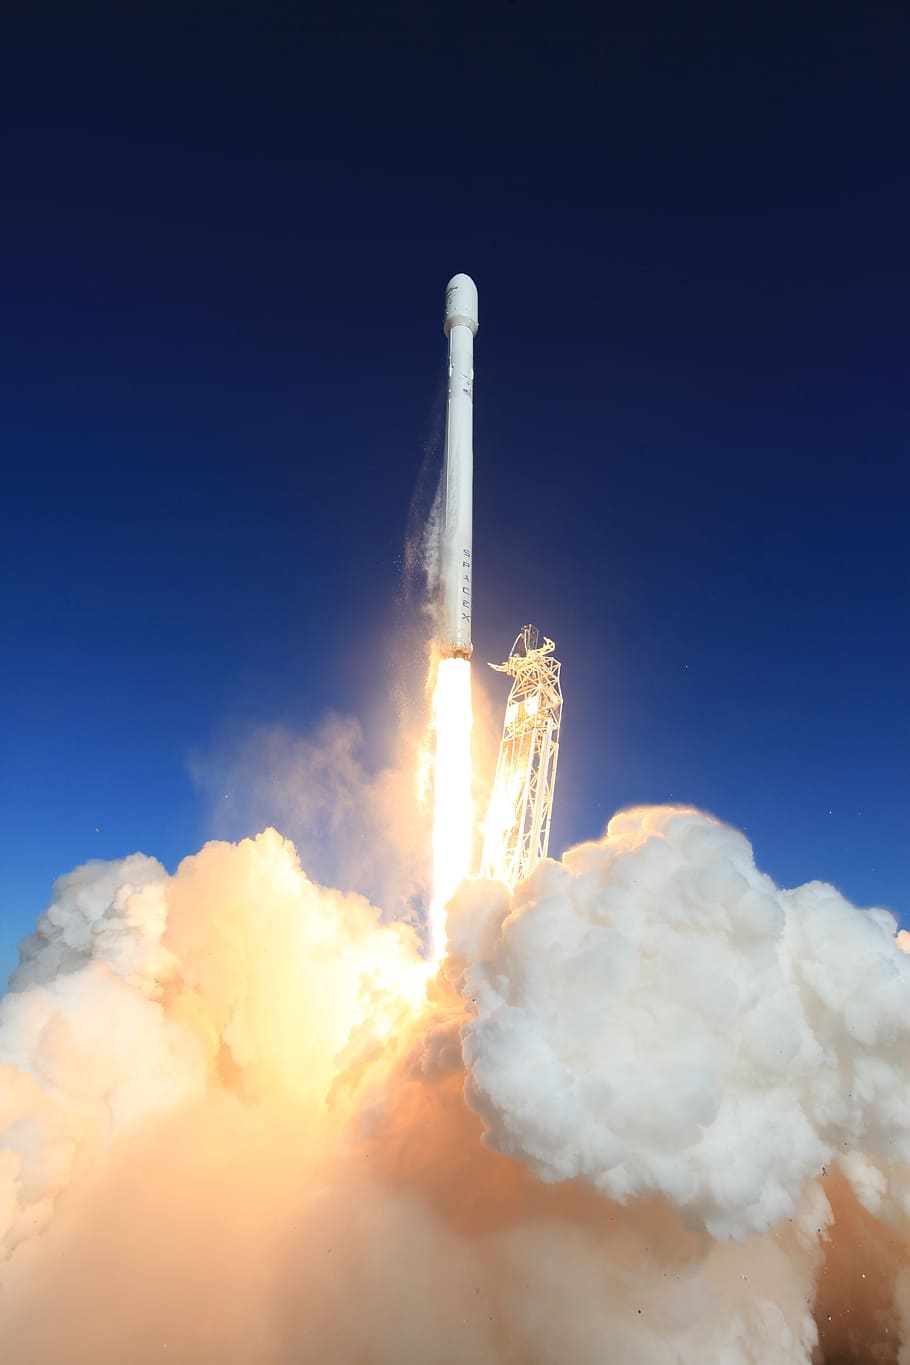 ignition, white, rocket, towards, blue, sky, daytimne, lift-off, rocket launch, spacex